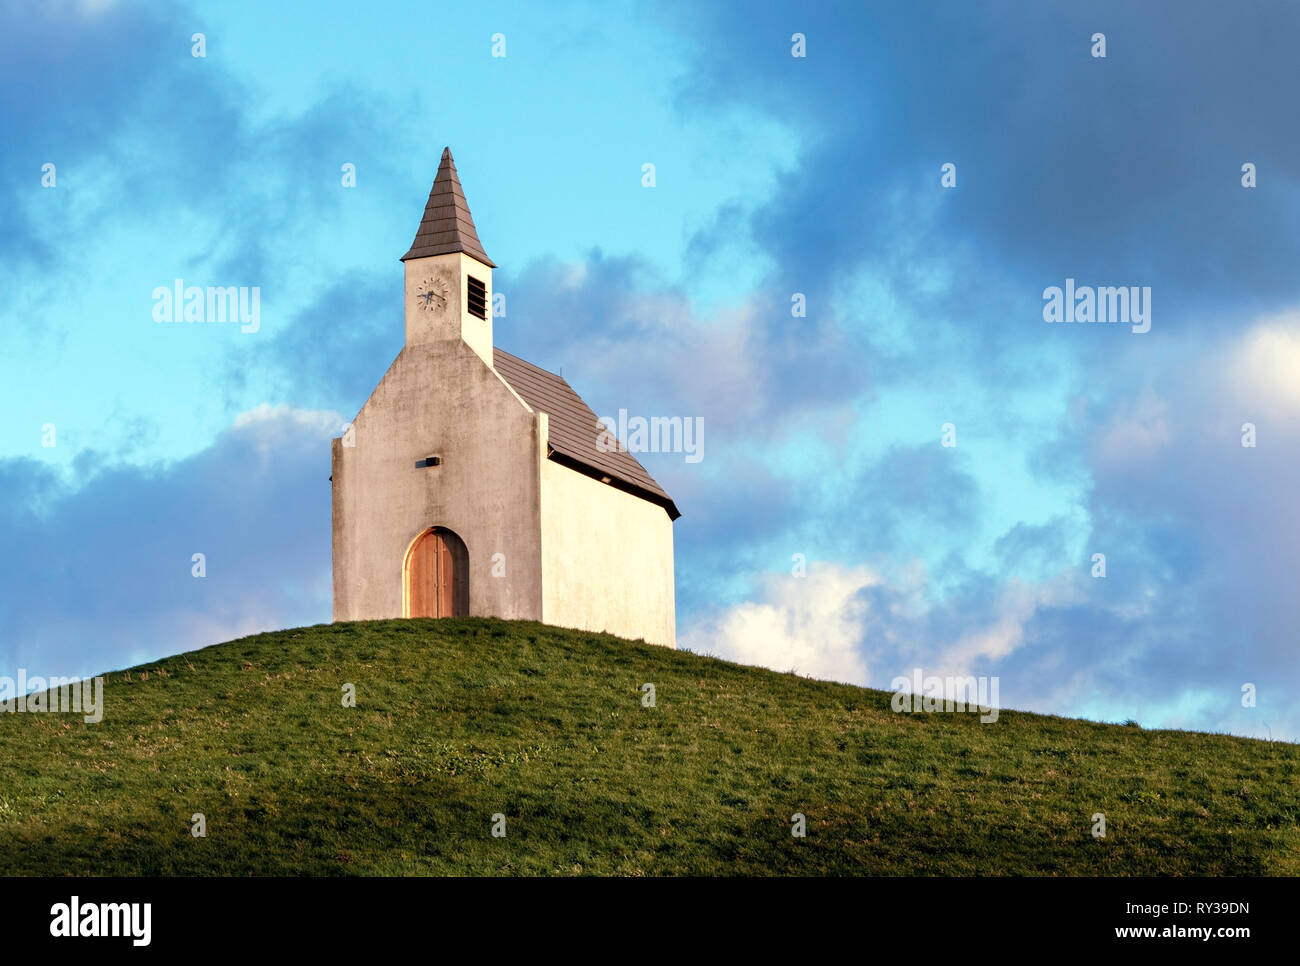 The little white chapel church on the hill. - Image Stock Photo